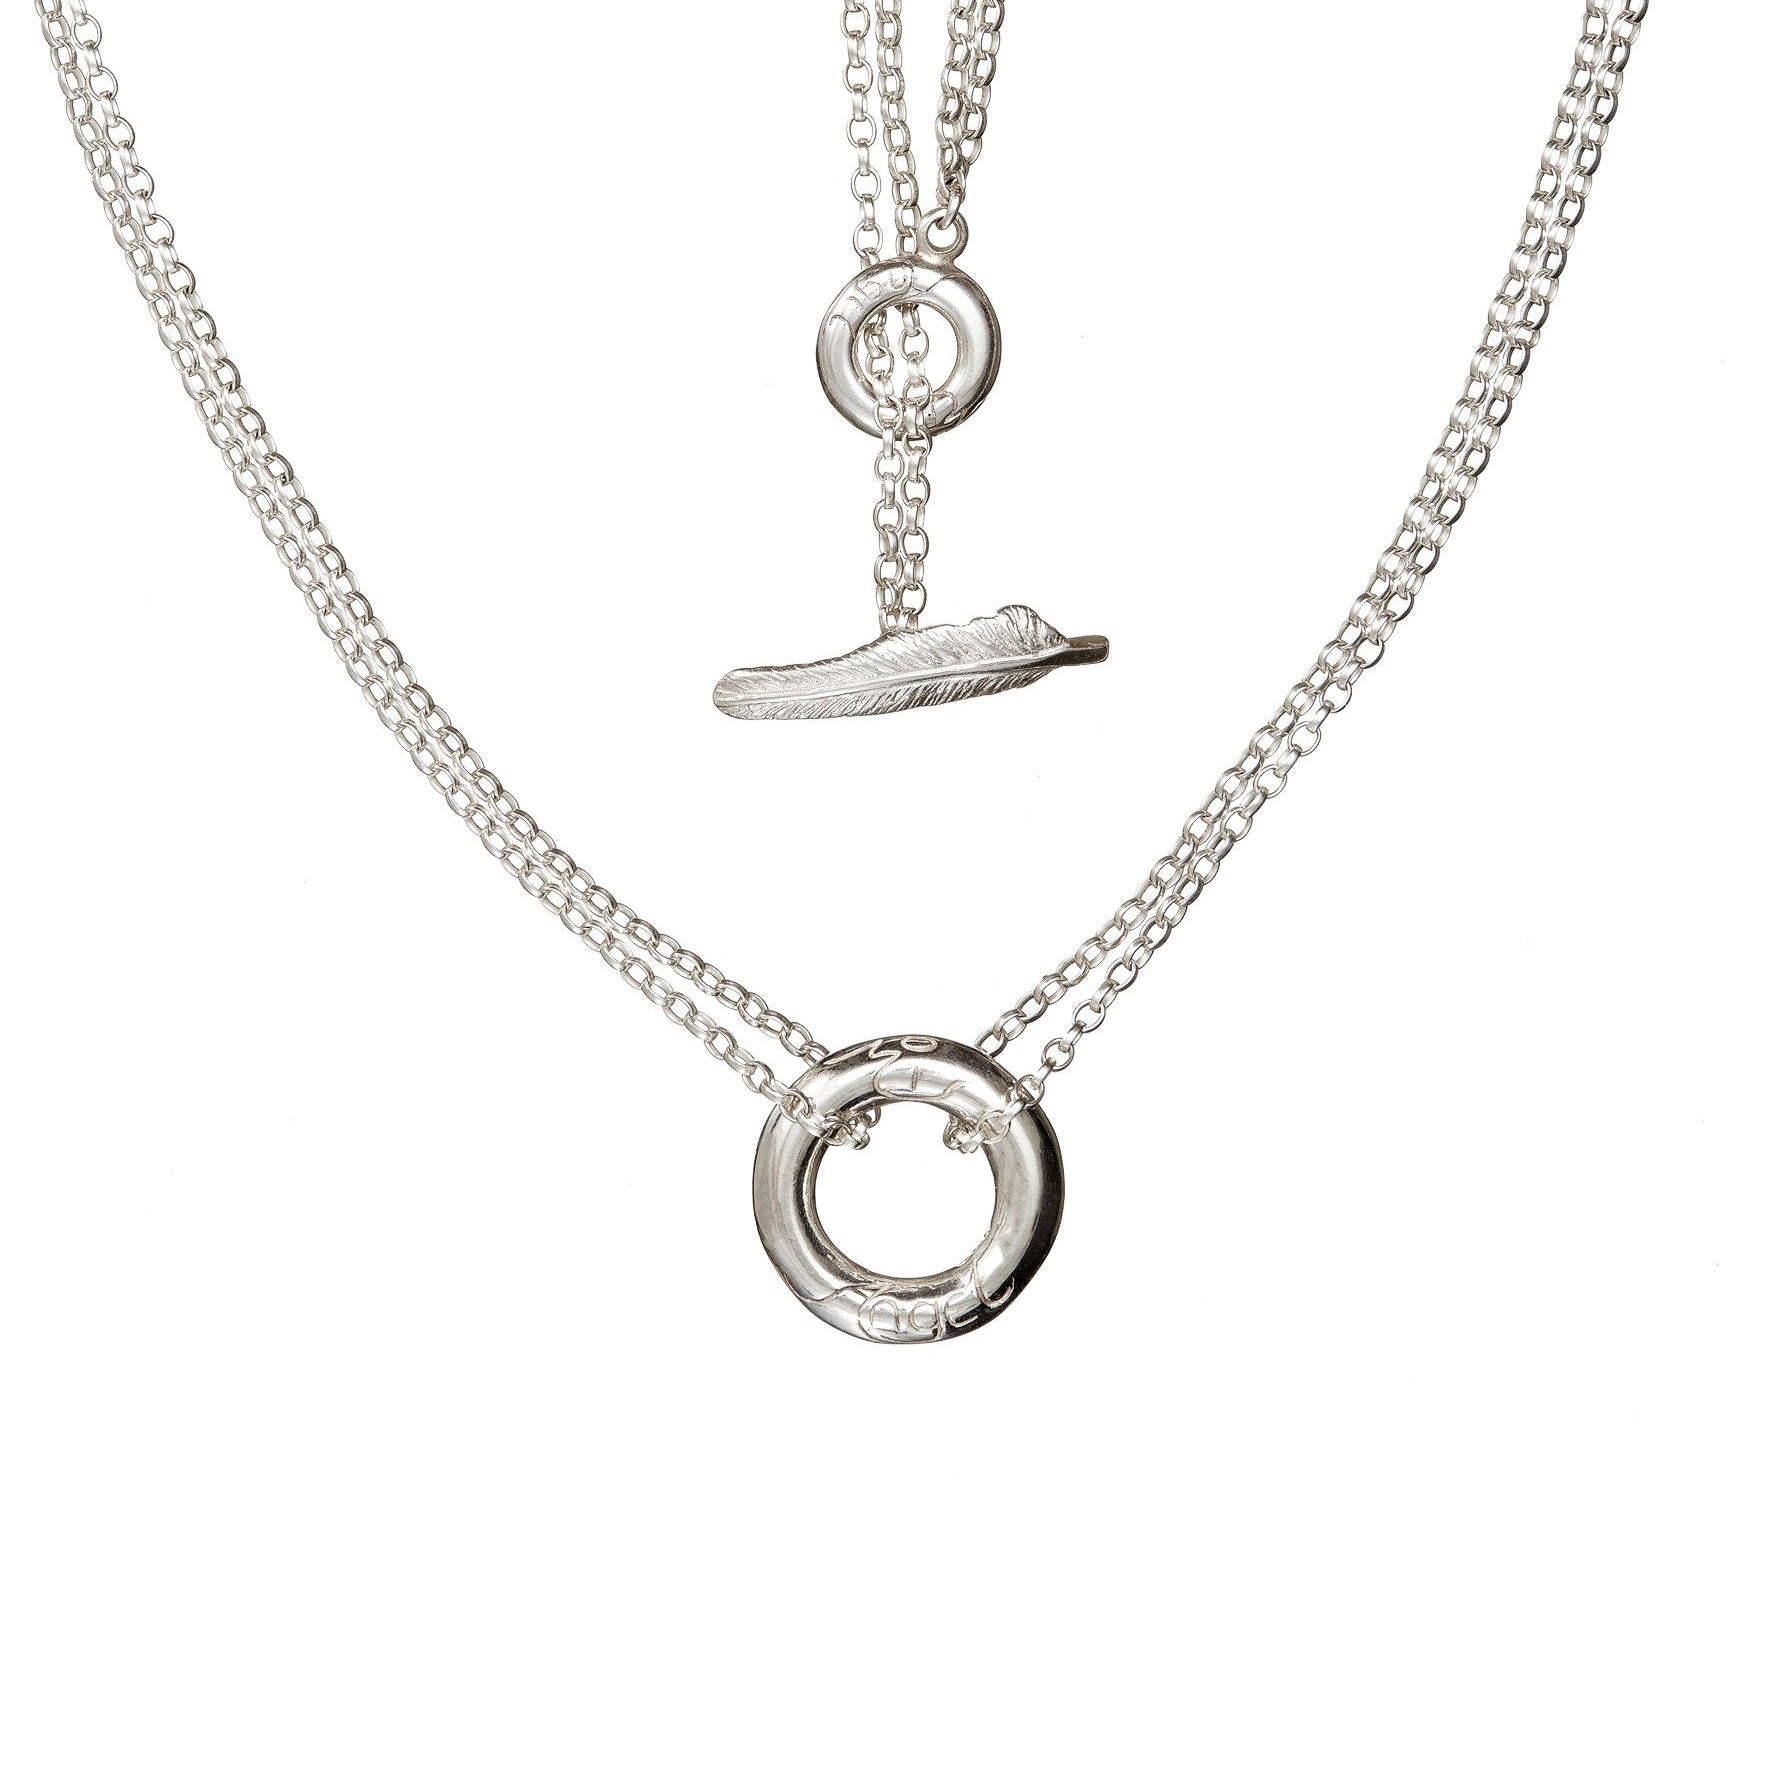 Elena's Embrace of the Angels Necklet, handcrafted from sterling silver, it is a special gift from the Angels.